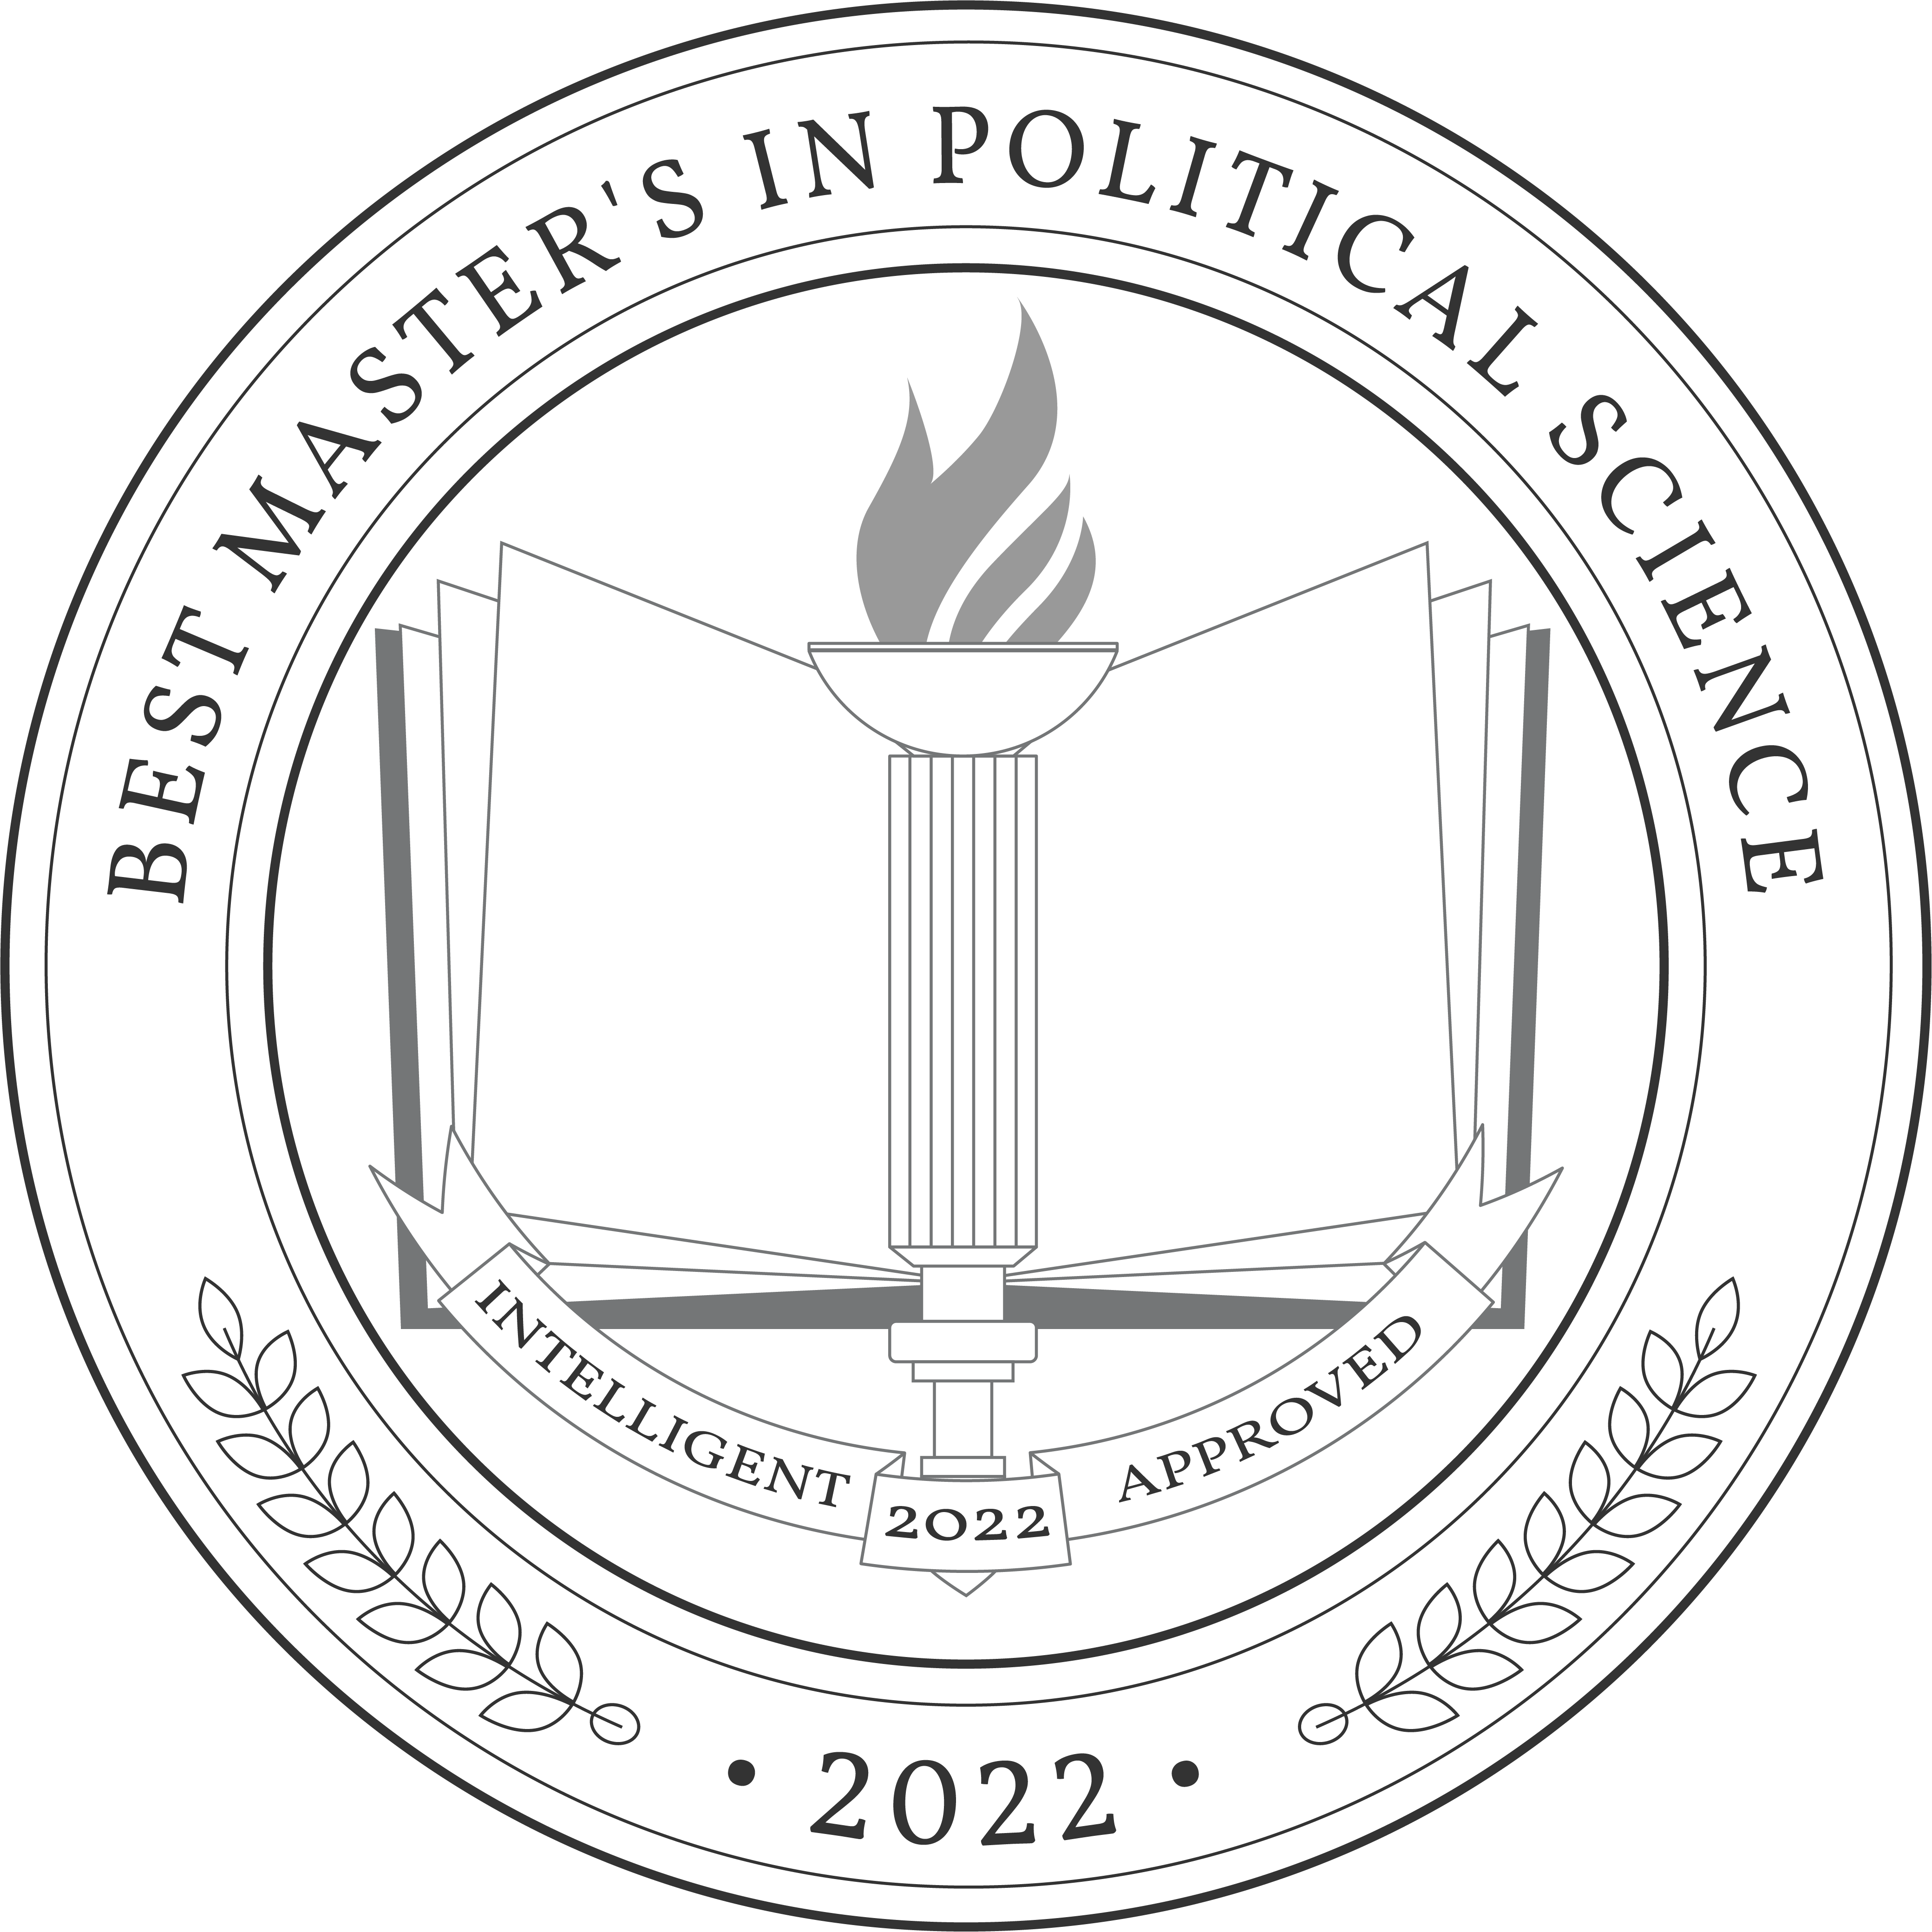 Best Master's in Political Science Badge